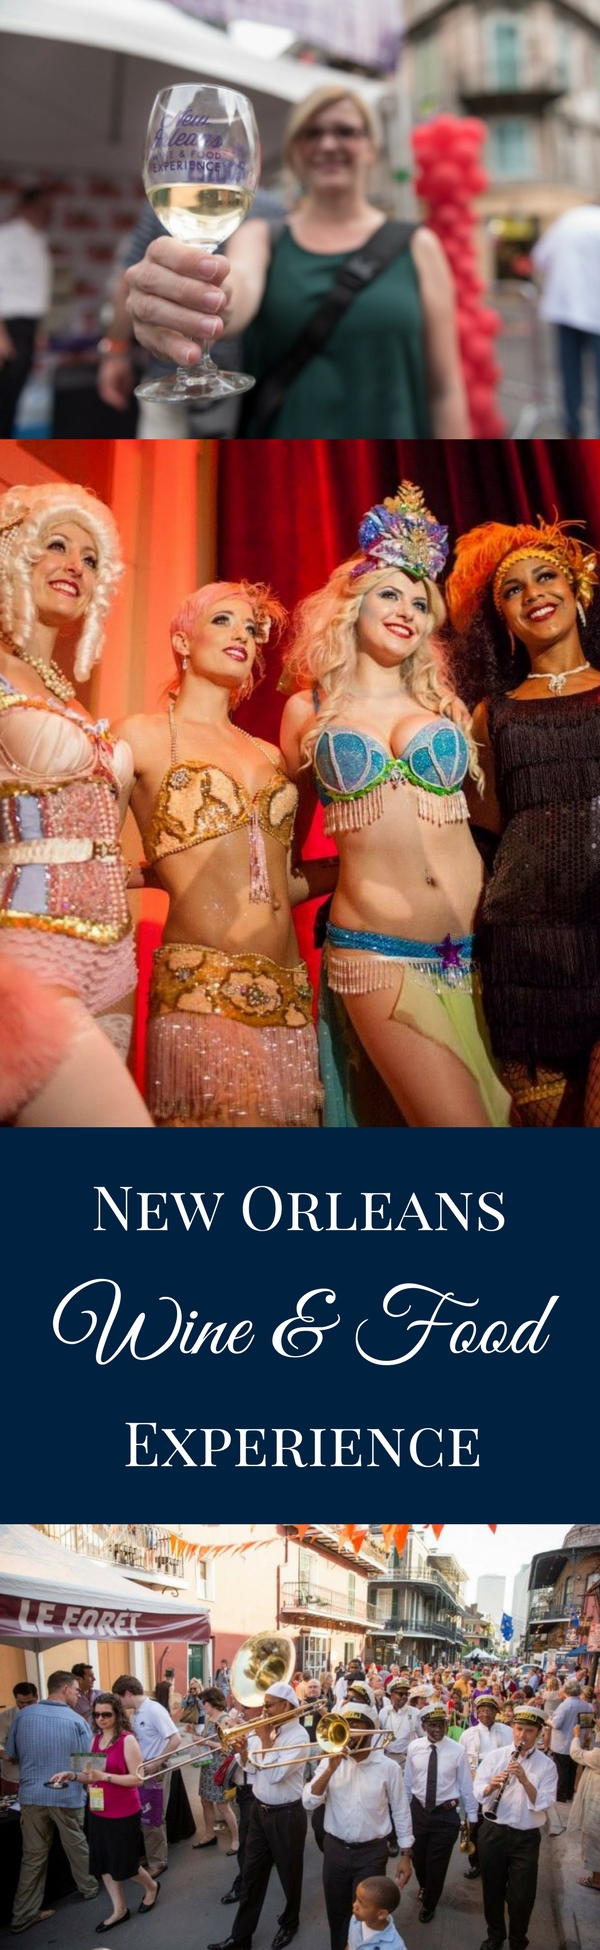 The annual New Orleans Wine and Food Experience (NOWFE) is a literal and figurative feast for the senses, perfect for wine-lovers and foodies.